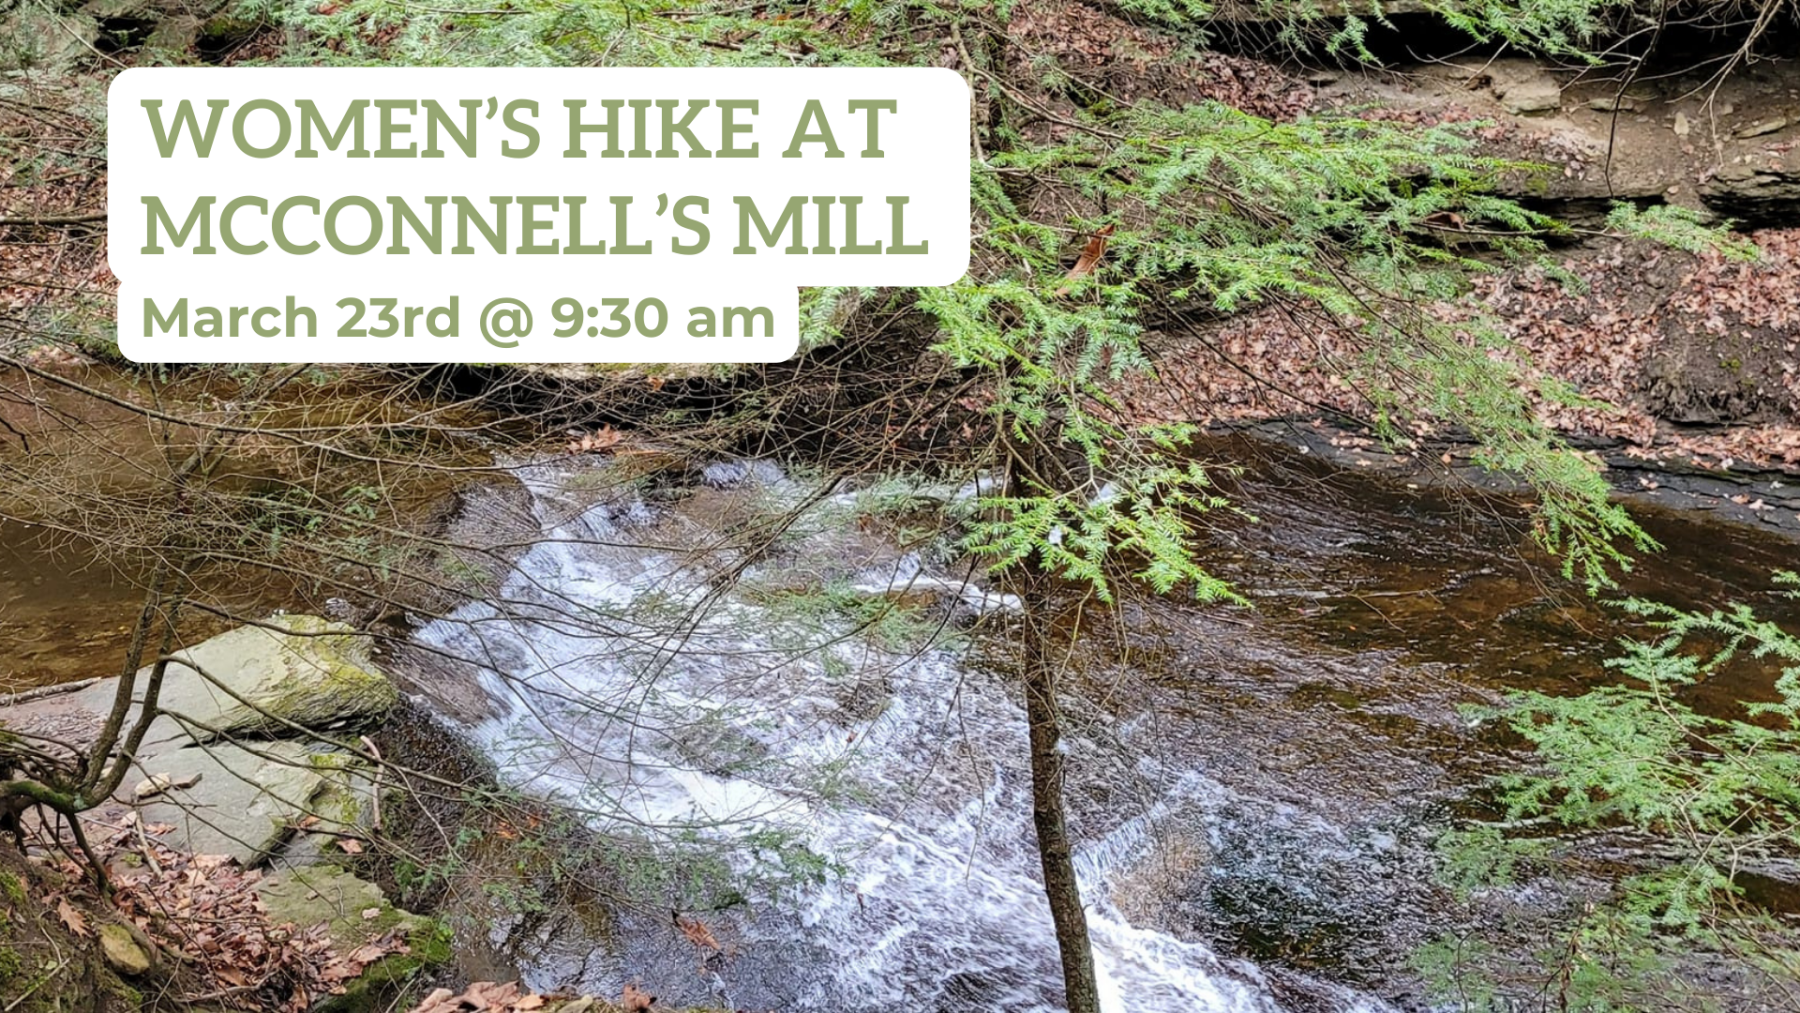 Women's Hike at McConnell's Mill